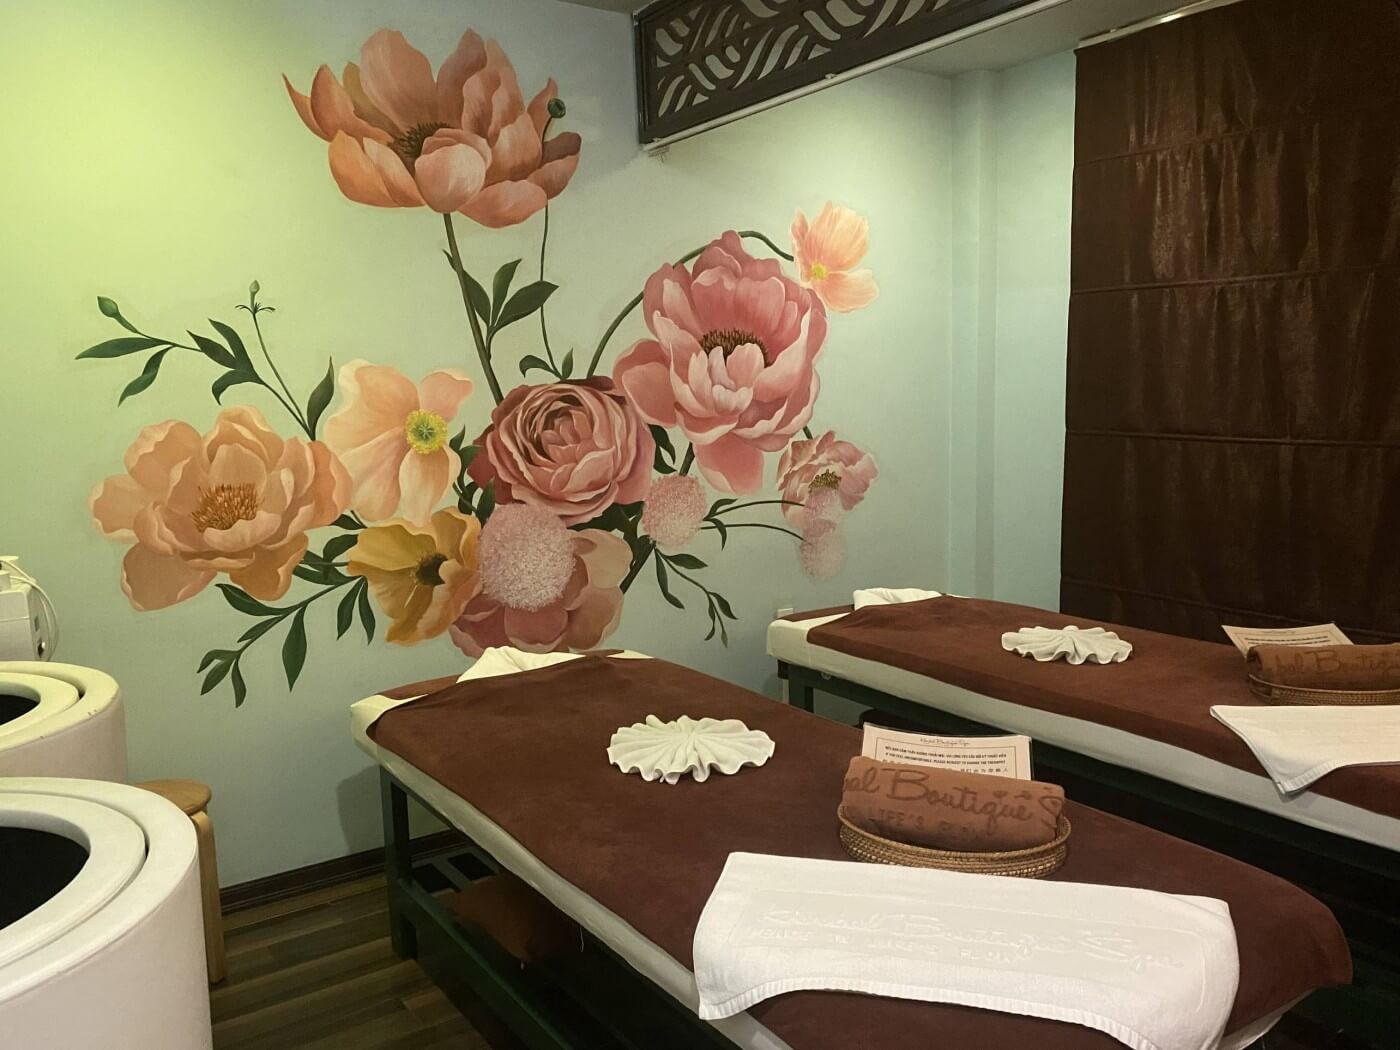 A herbal steam room adorned in traditional Vietnamese style at a spa in Danang